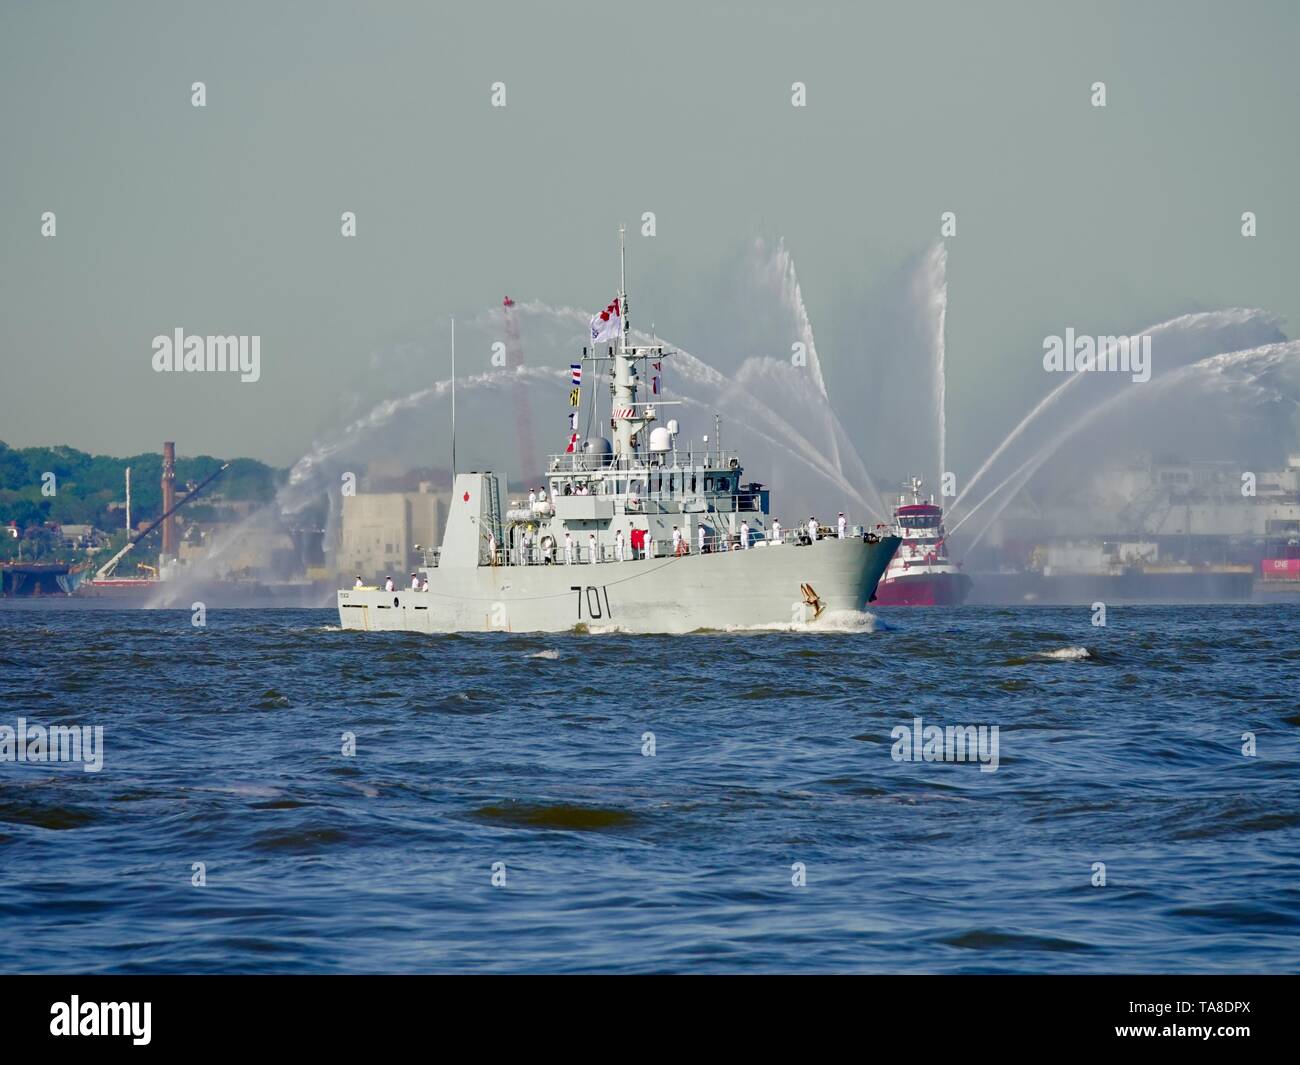 HMCS Glace Bay, Royal Canadian Navy Maritime Coastal Defence Vessel, sailing in front of a fire boat streaming water, Fleet Week, New York, NY, USA Stock Photo